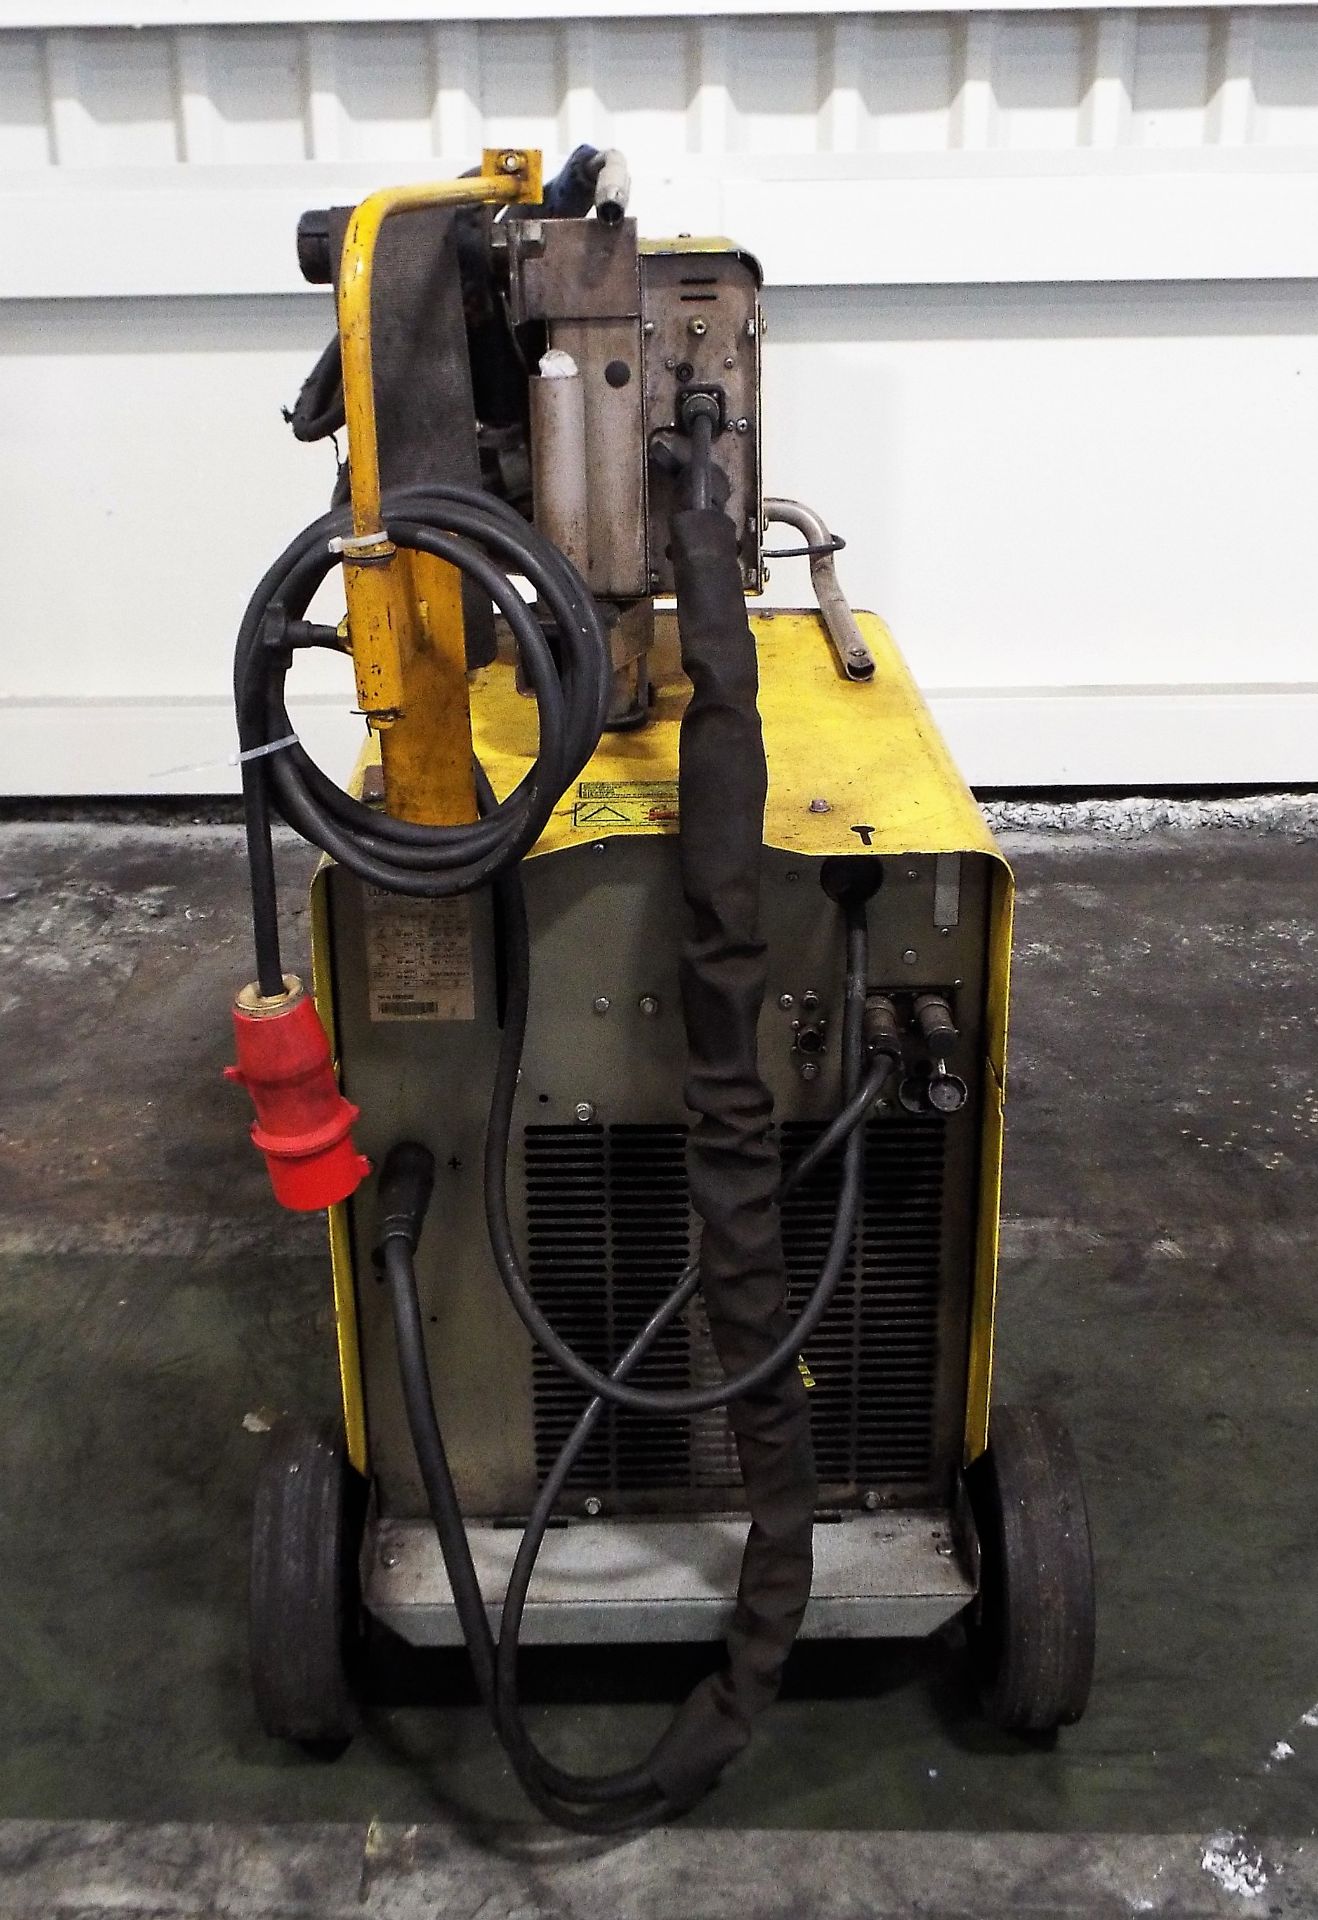 Esab Aristo Portable Welding Set complete with MEK 44C Wire Feed & PUA-1 Pendant. - Image 4 of 8